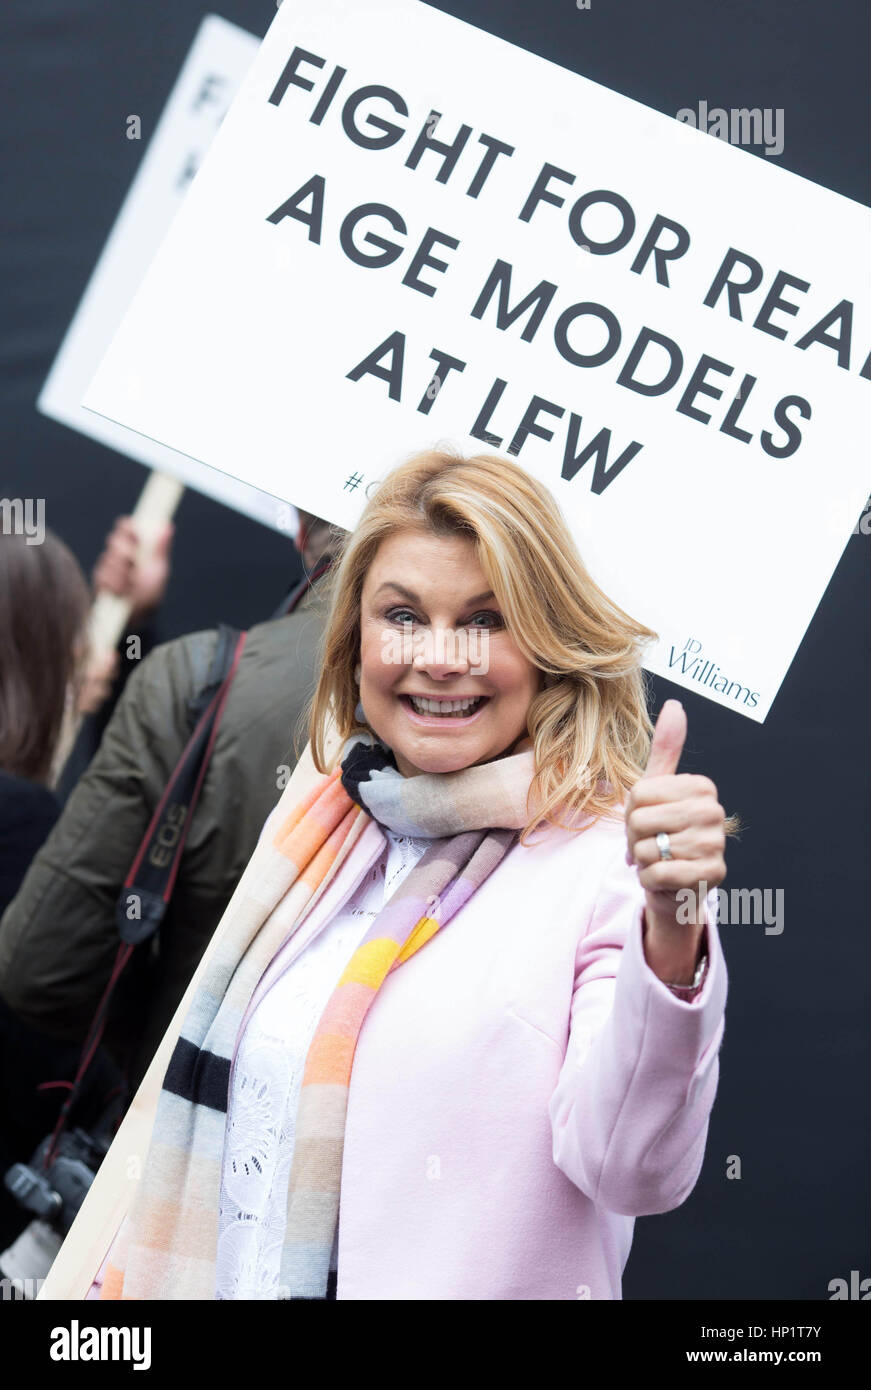 EDITORIAL USE ONLY Jilly Johnson, 63, takes part in a mature models protest on the Strand in London, as retailer JD Williams demonstrates against ageism at London Fashion Week. Stock Photo